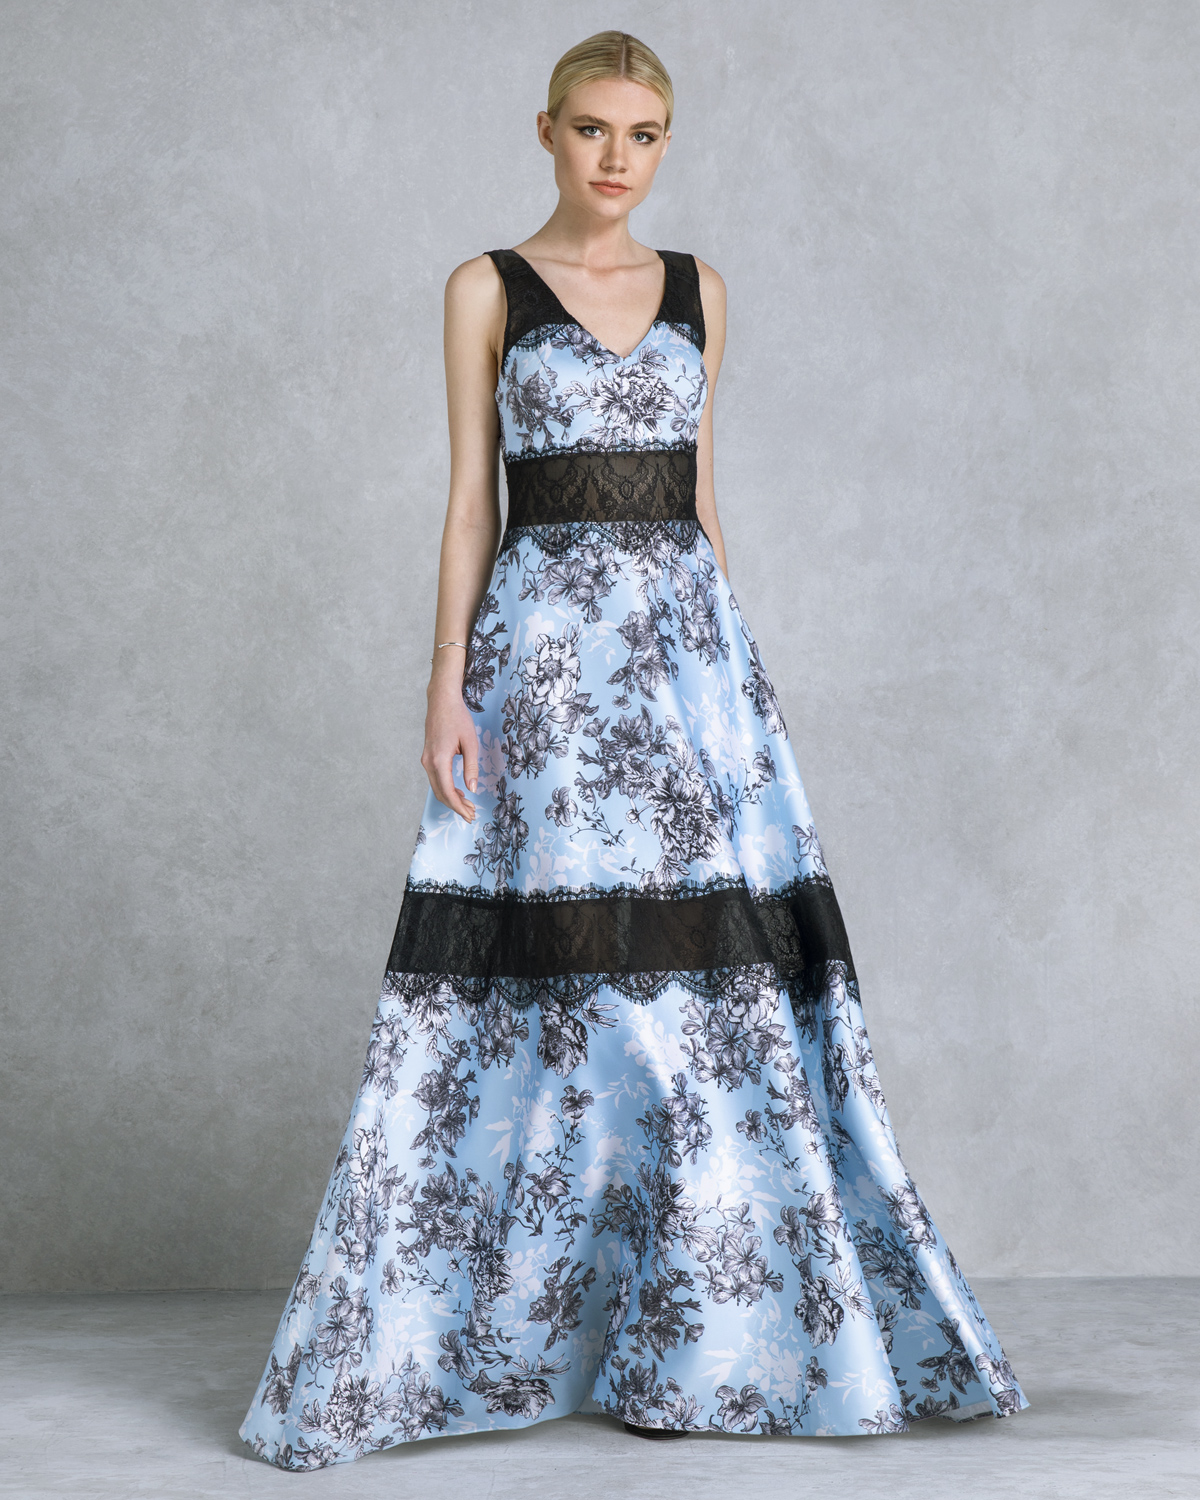 Cocktail Dresses / Cocktail printed dress with lace around the waist